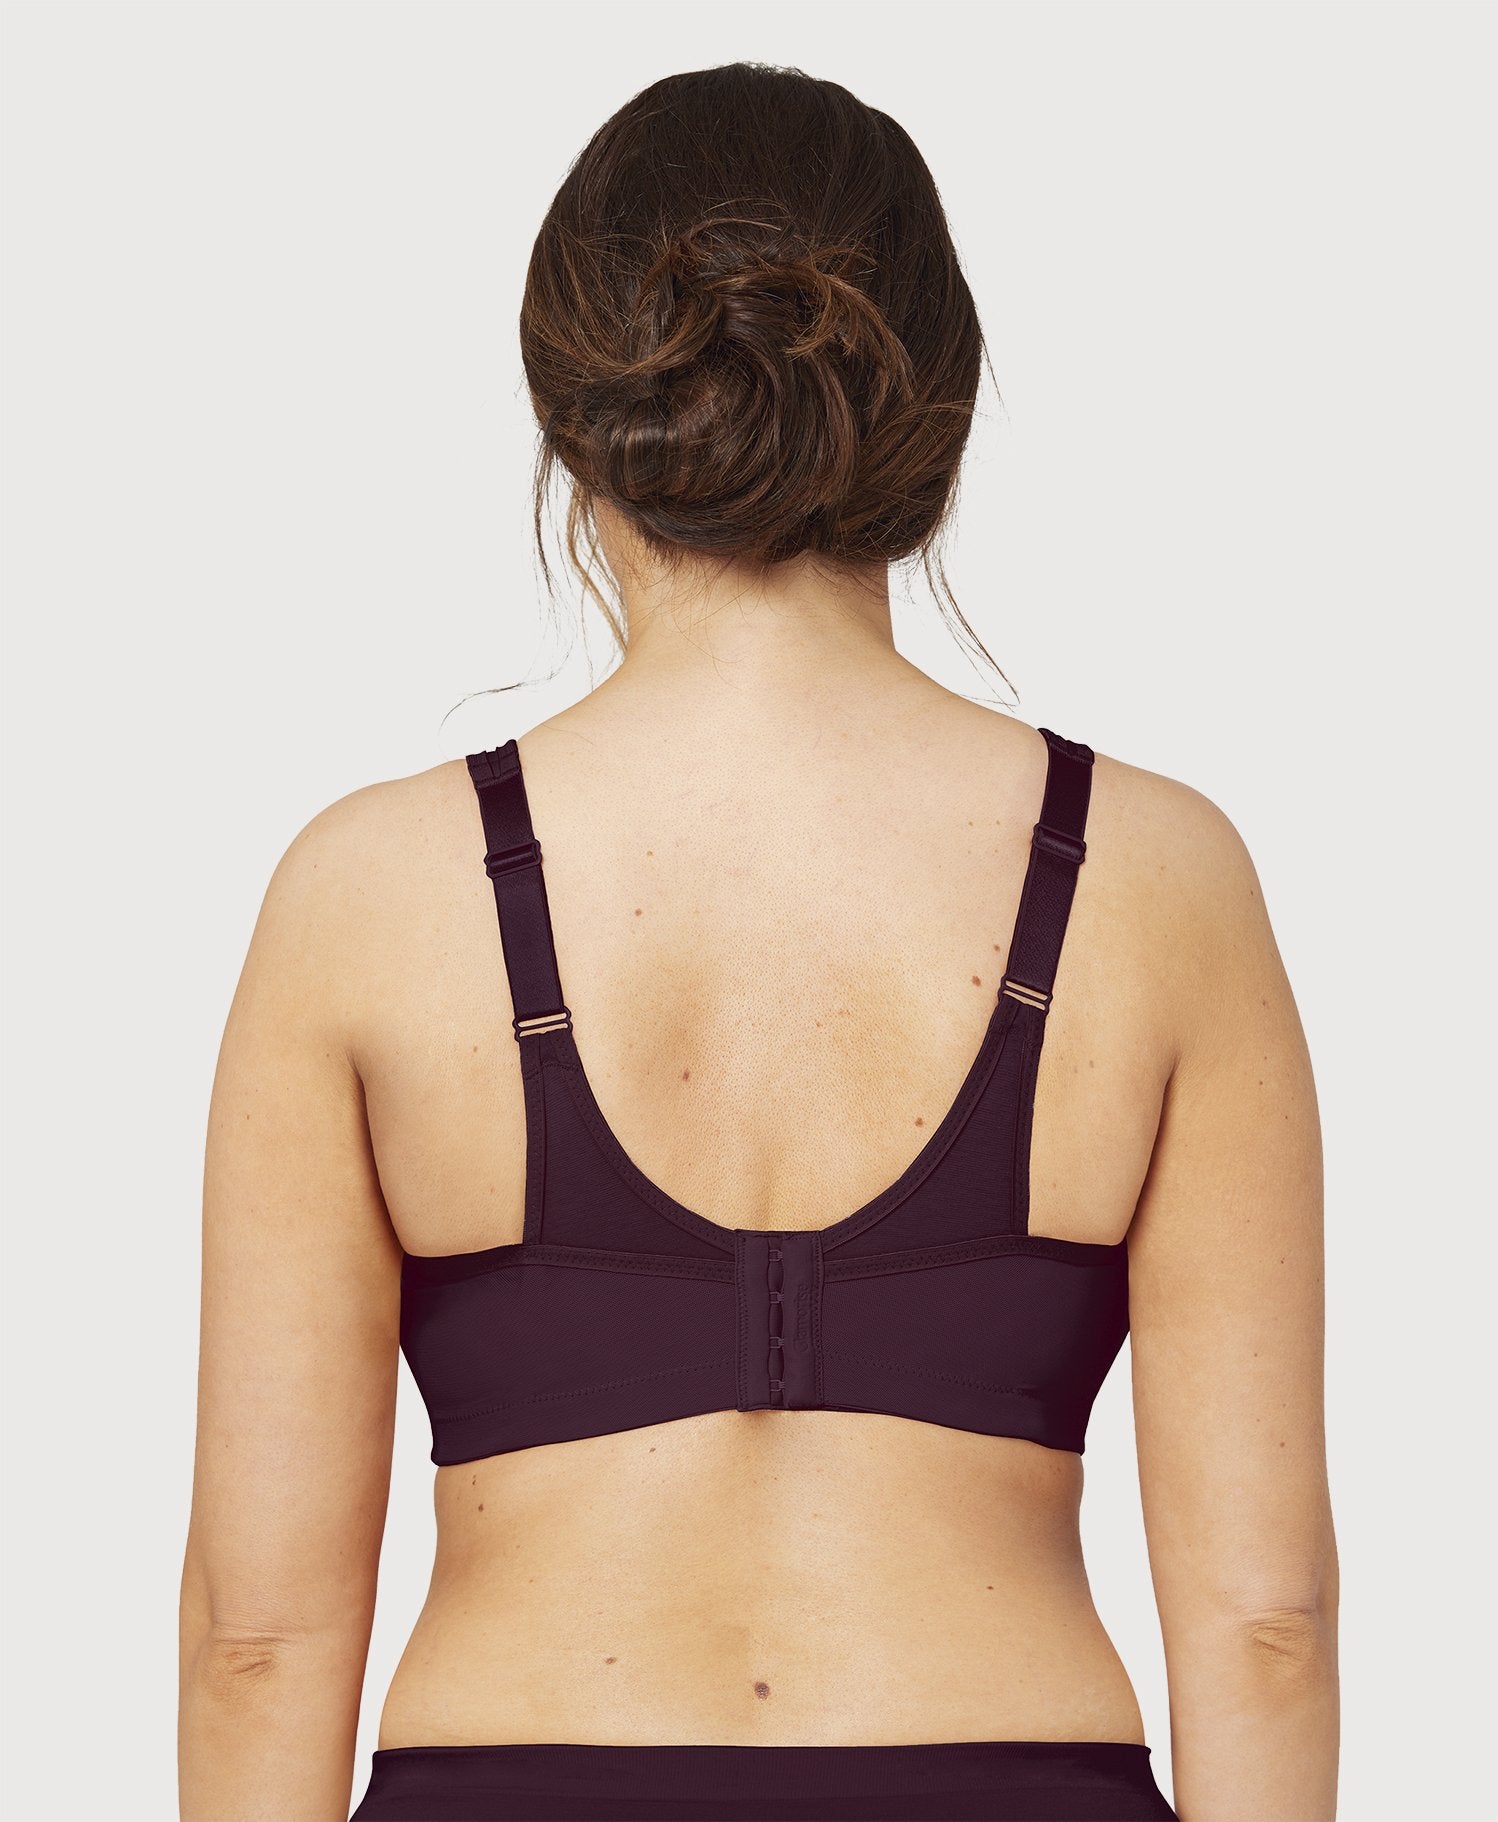 Glamorise MagicLift Active Support Wirefree Bra 1005 (Women's & Women's Plus)  